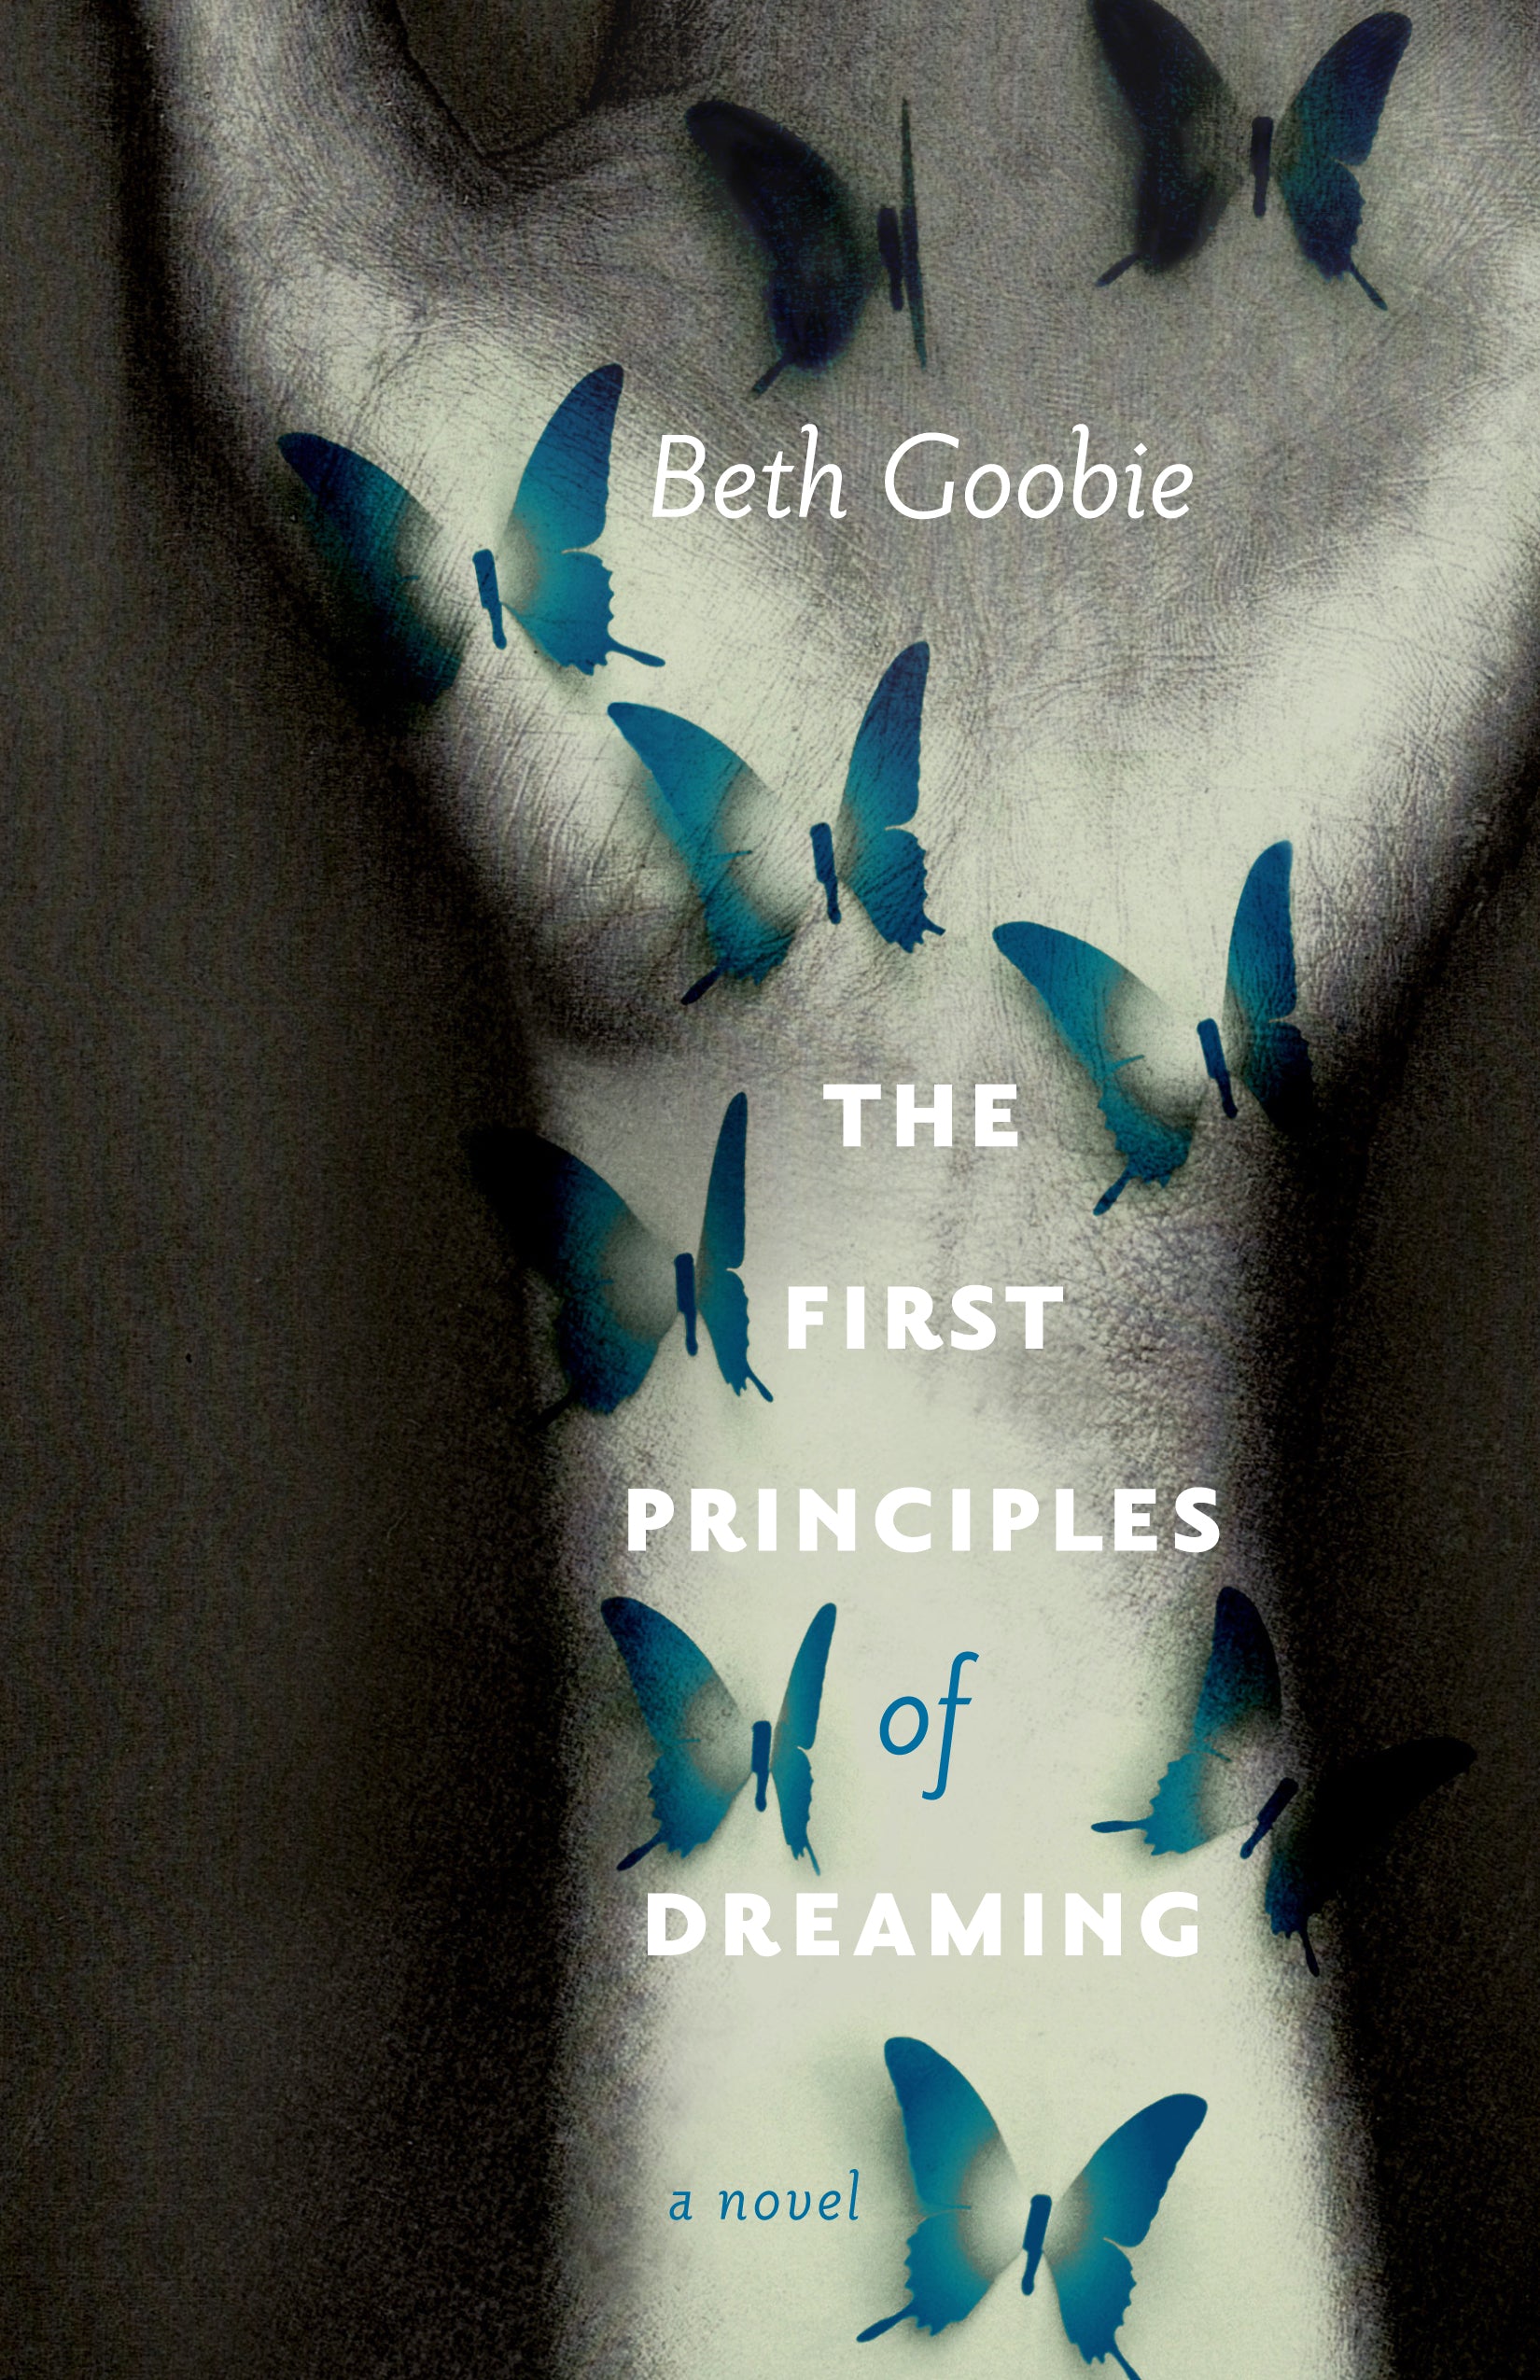 The First Principles of Dreaming